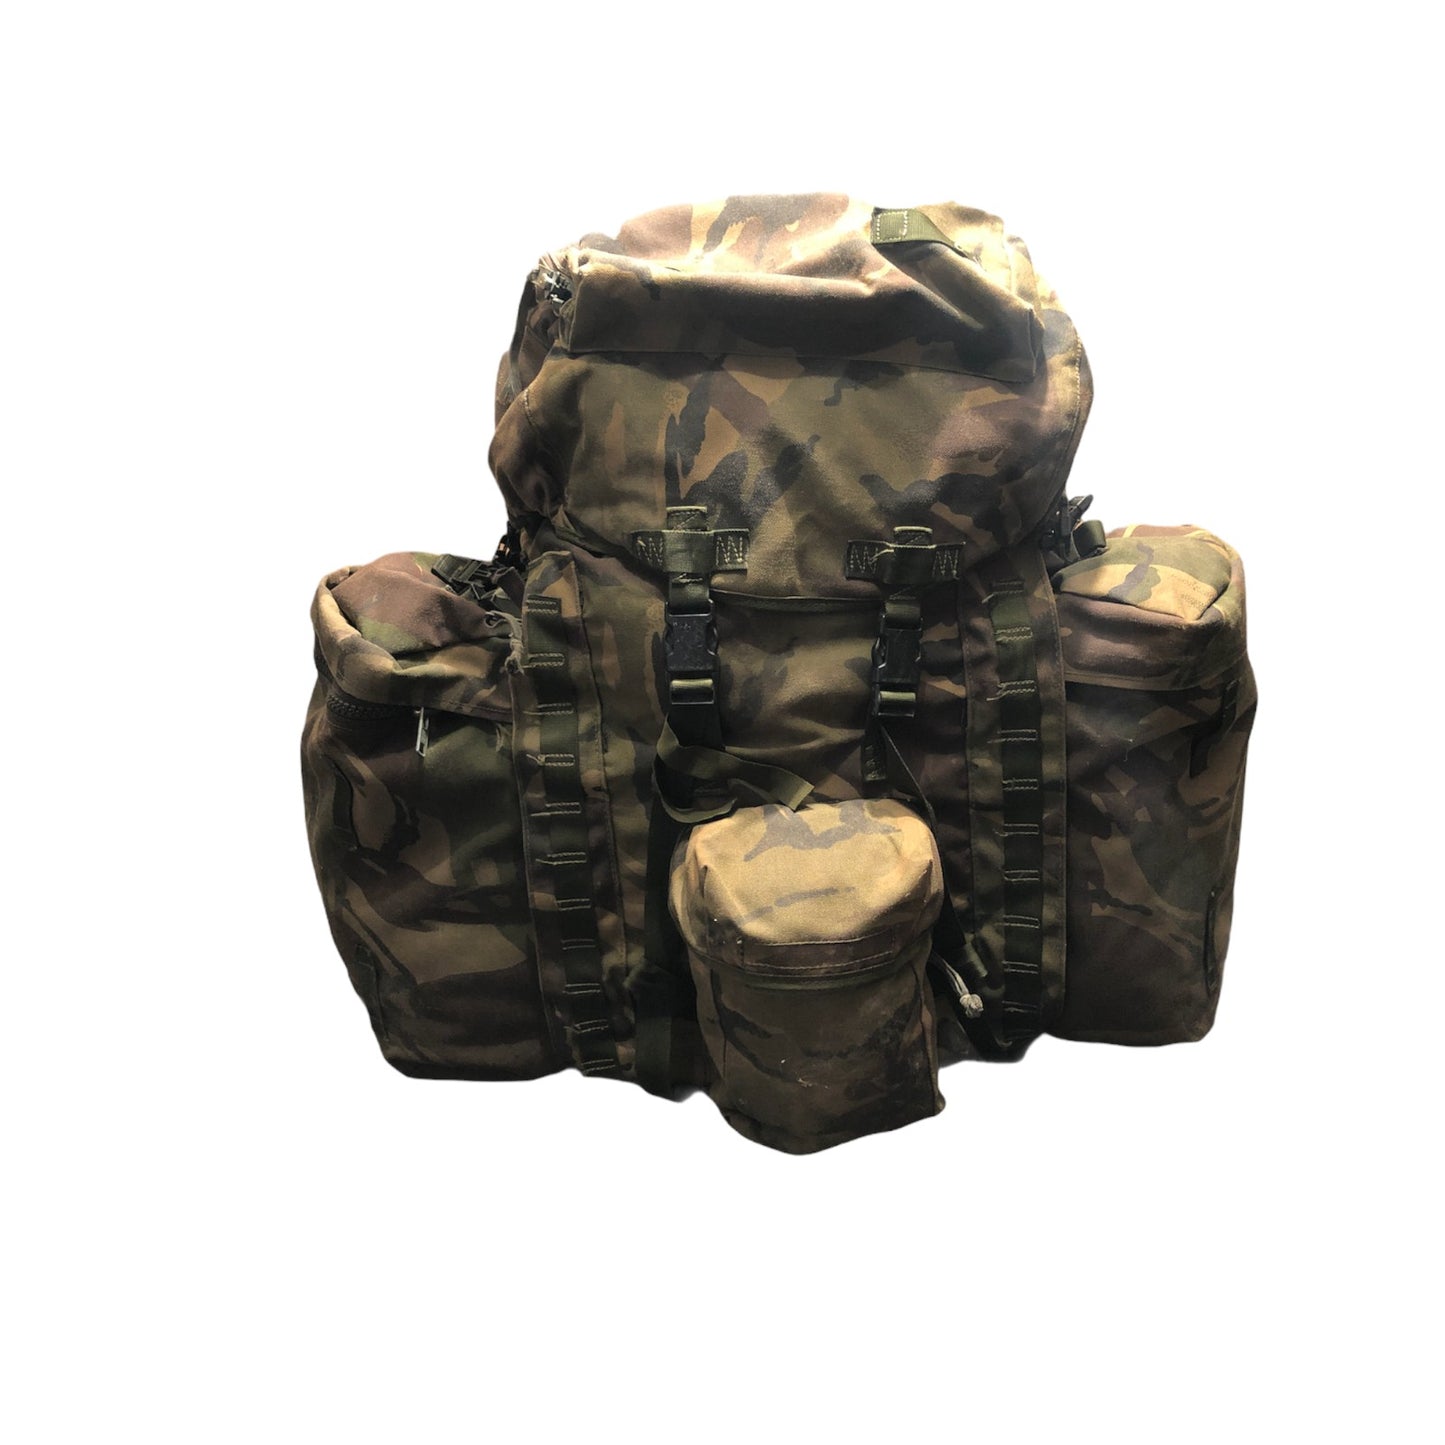 British Army 100 ltr bergen DPM short back grade 2 & side pouches